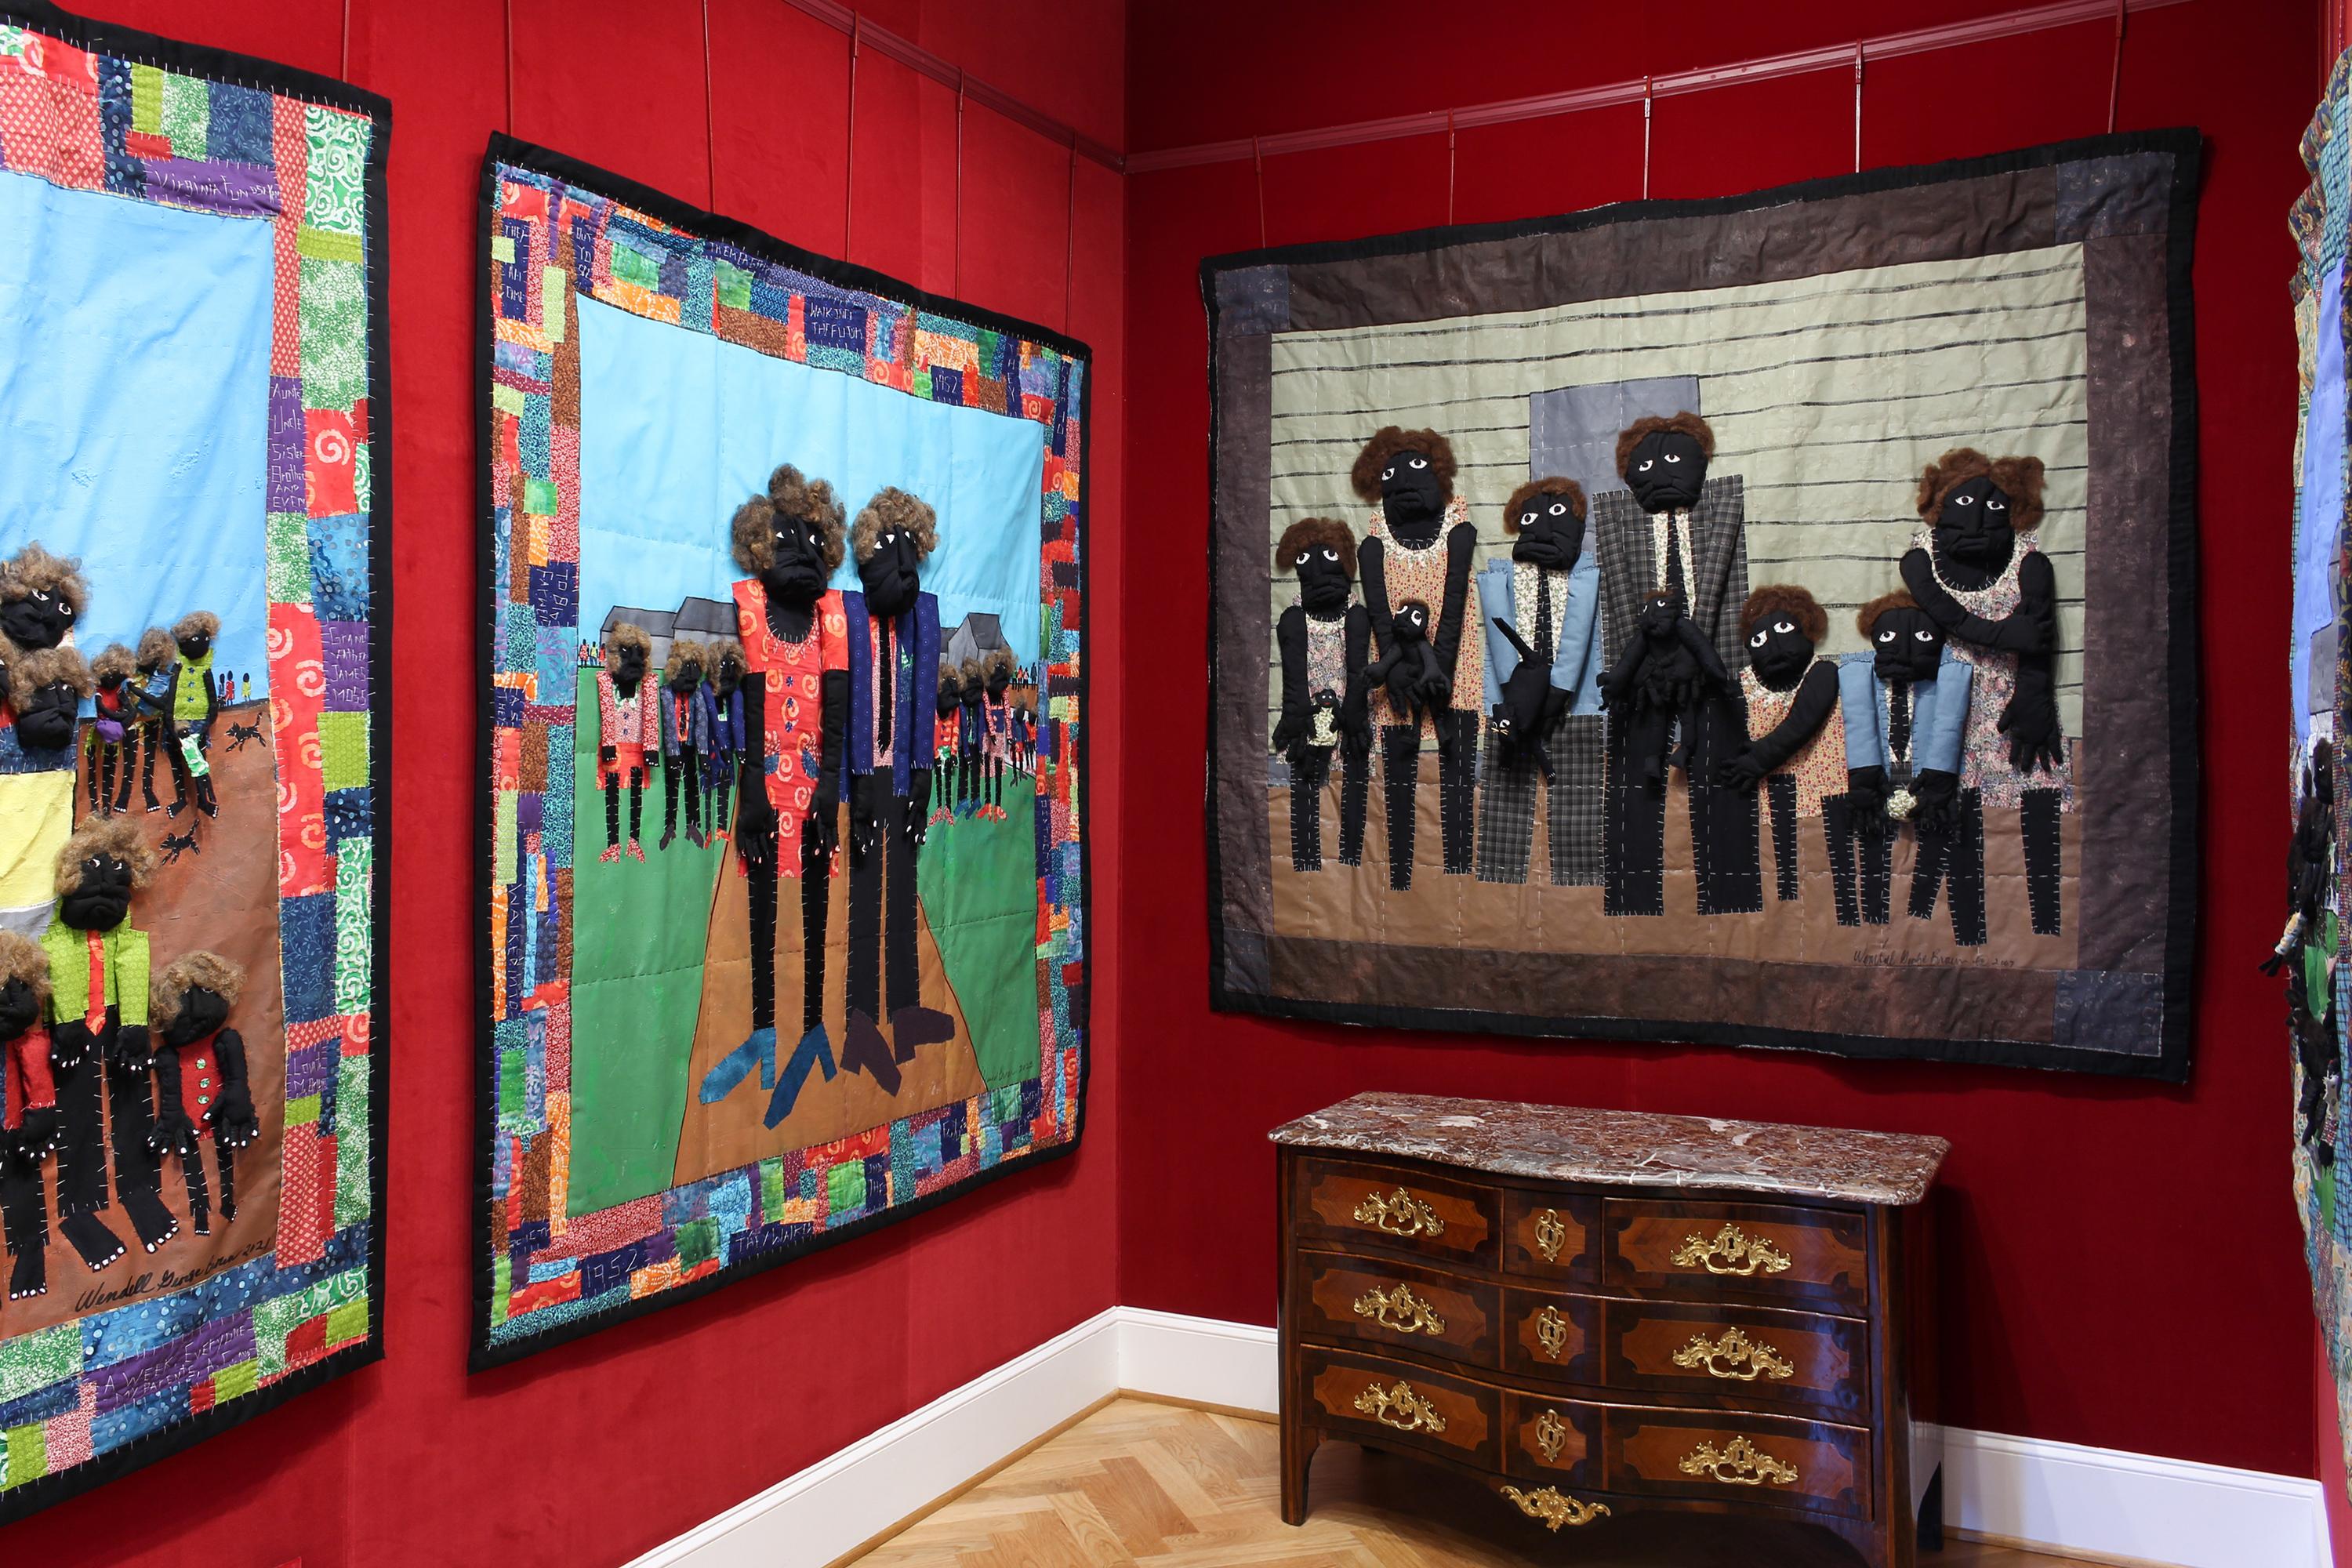 Columbia, South Carolina-based artist, Wendell George Brown creates quilts that explore the traditions of African American quilt-making and Negro Spirituals. After finding a hymnal book that belonged to his maternal grandmother, “Everlasting Life is